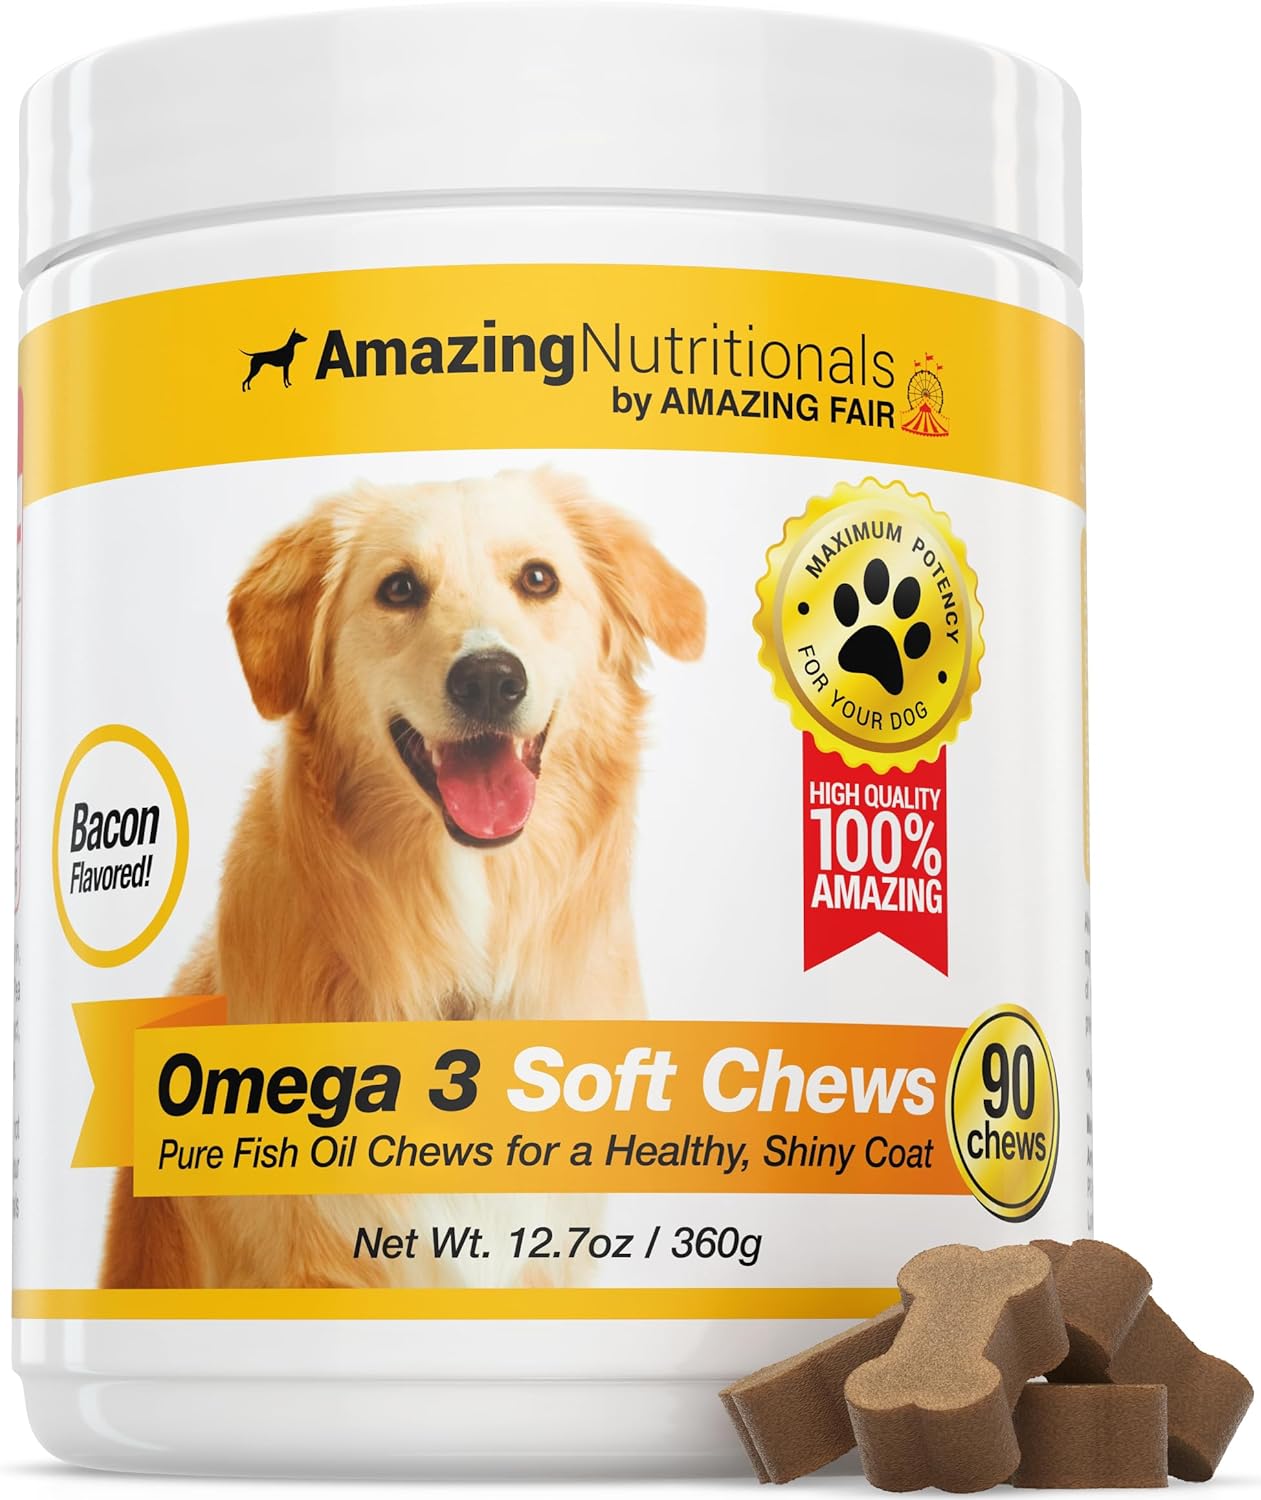 Amazing Omega 3 Fish Oil for Dogs - Omega 3 for Dogs Shedding and Itchy Skin Relief for Dog Dry Skin and Hot Spots, EPA and DHA Fatty Acids, Dog Skin and Coat Supplement - 90 Bacon Soft Chews